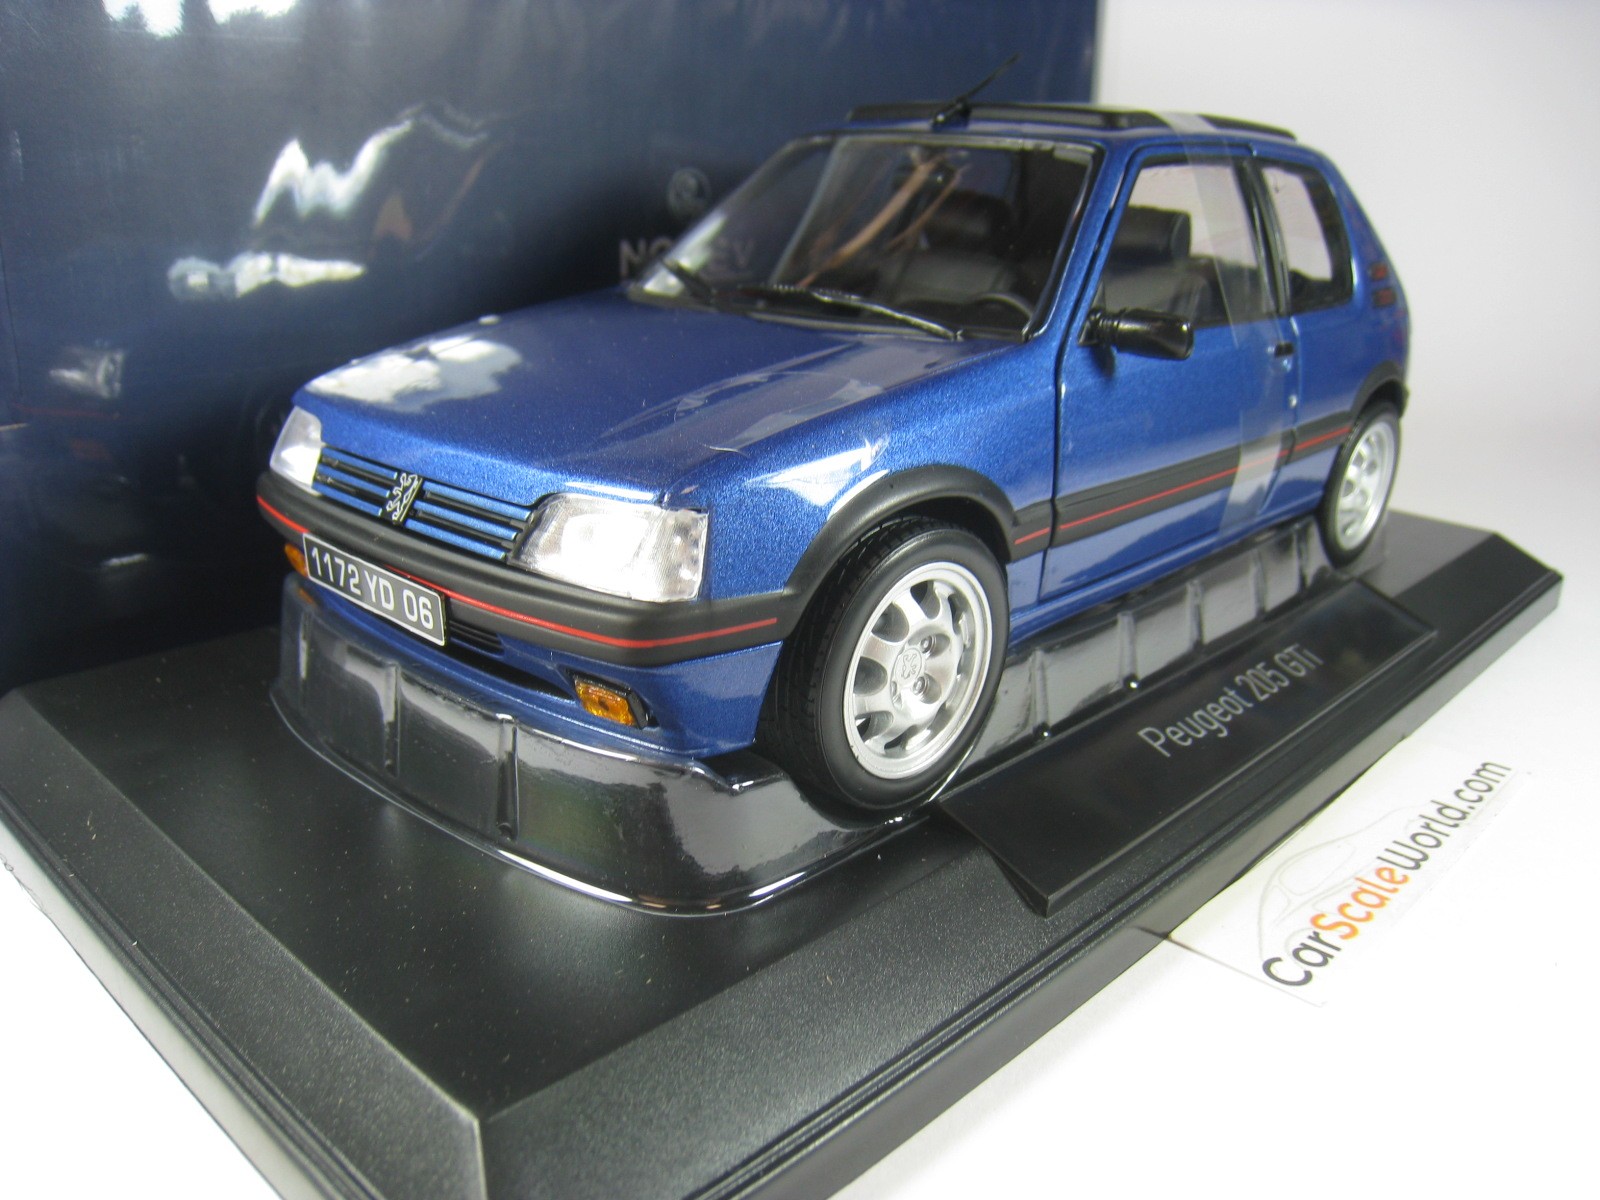 PEUGEOT 205 GTI 1.9 PHASE 2 1992 WITH WINDOW ROOF 1/18 NOREV (MIAMI BL